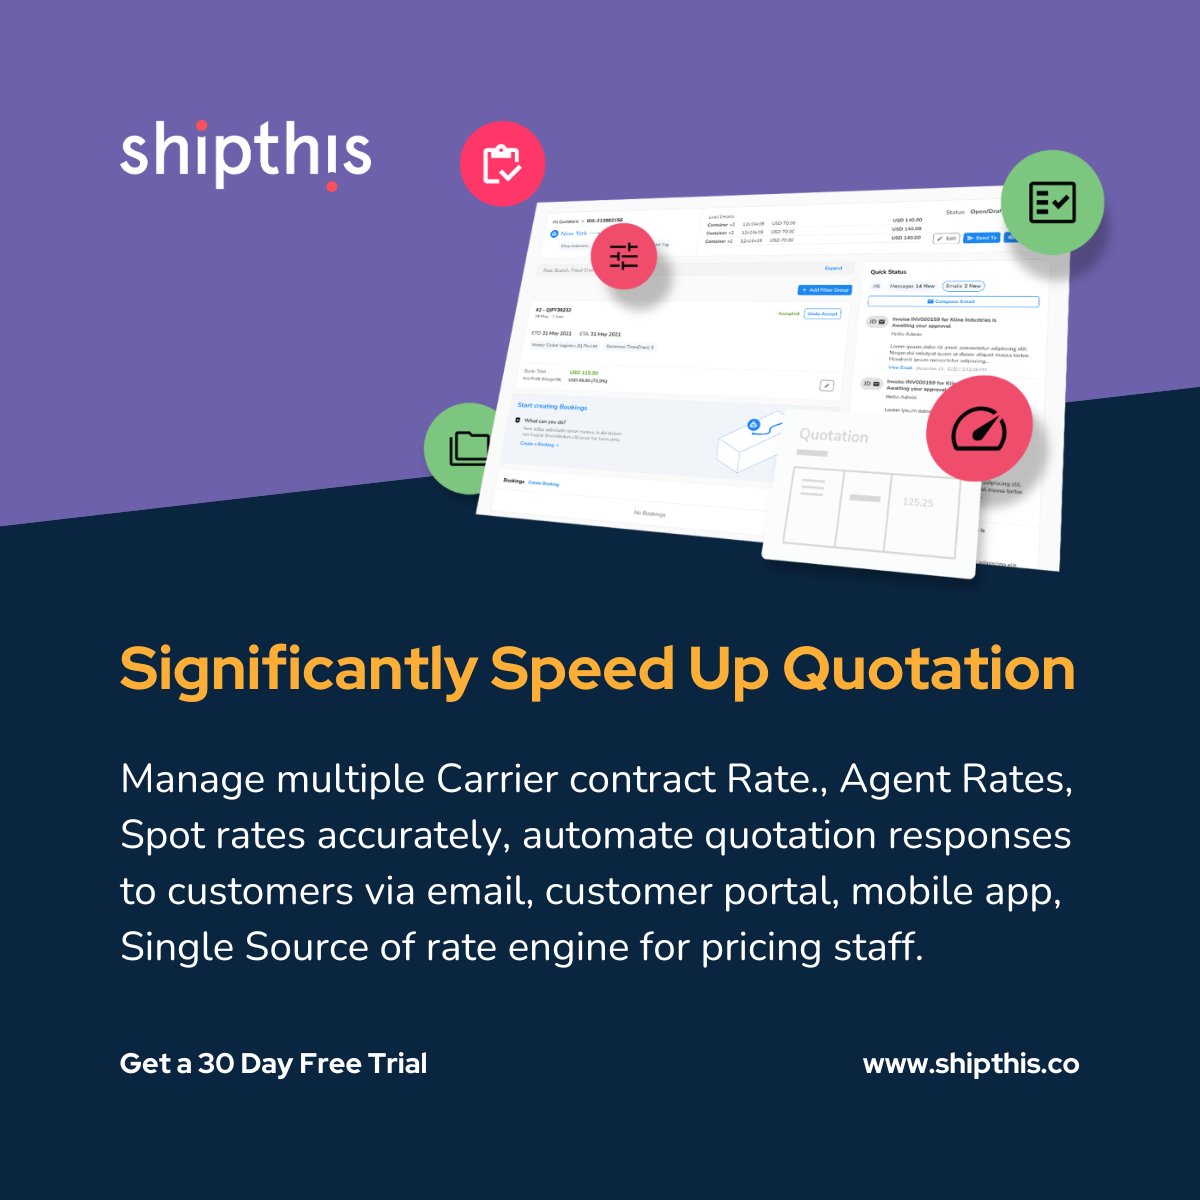 Shipthis efficiently handles multiple carrier contract rates, spot rates, and agent rates. Automate your freight quote responses, centralize the pricing engine for your pricing team, and help you boost your quote to win rate! #Shipthis #frieghttraiff #logisticspricing